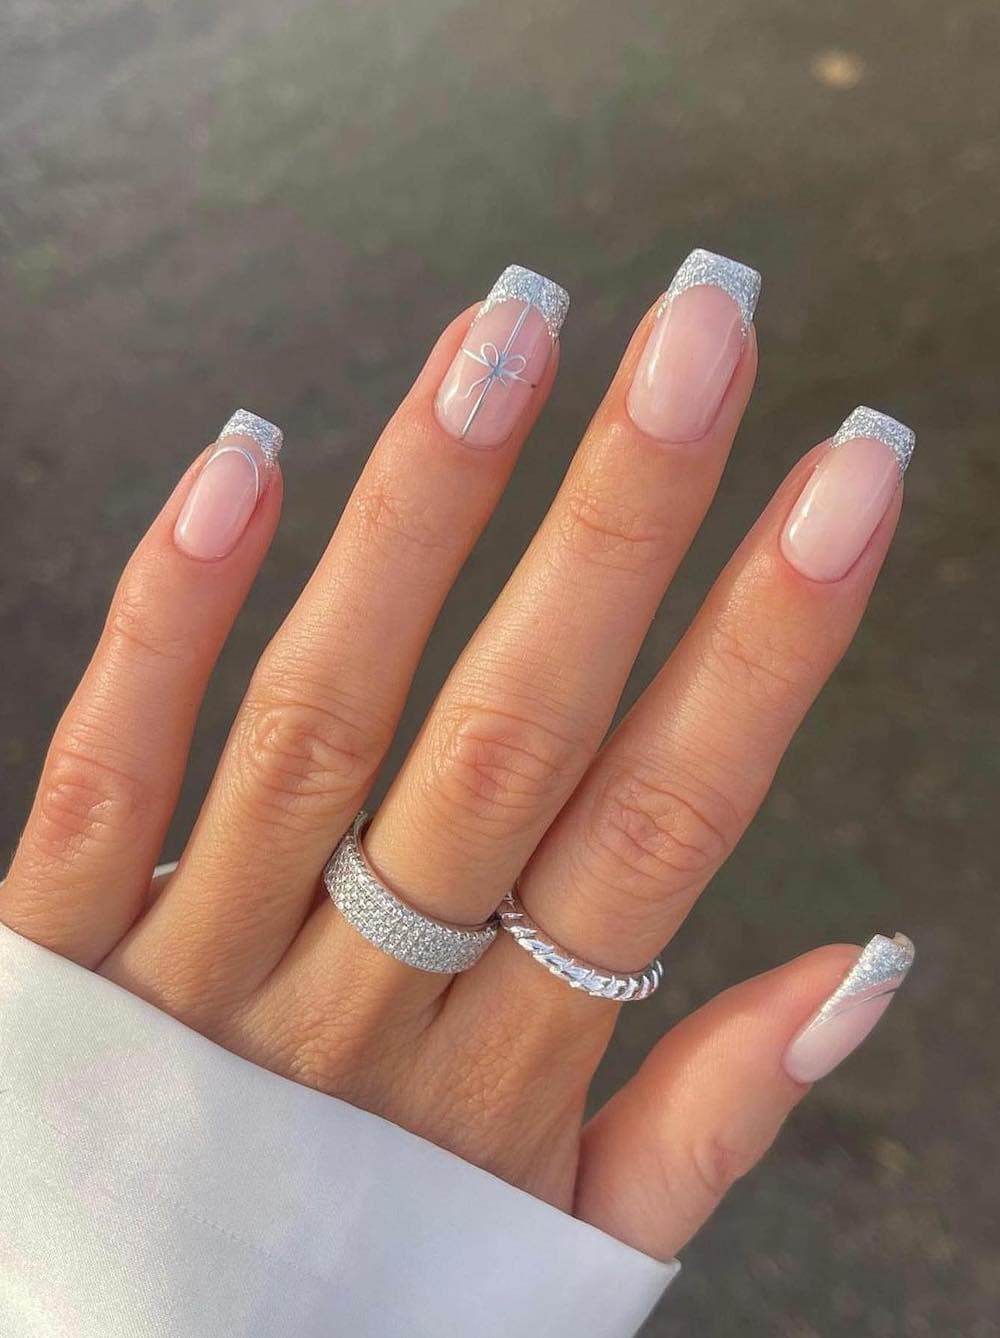 A hand with short square nails painted a glossy nude with silver glitter French tips and a bow accent nail